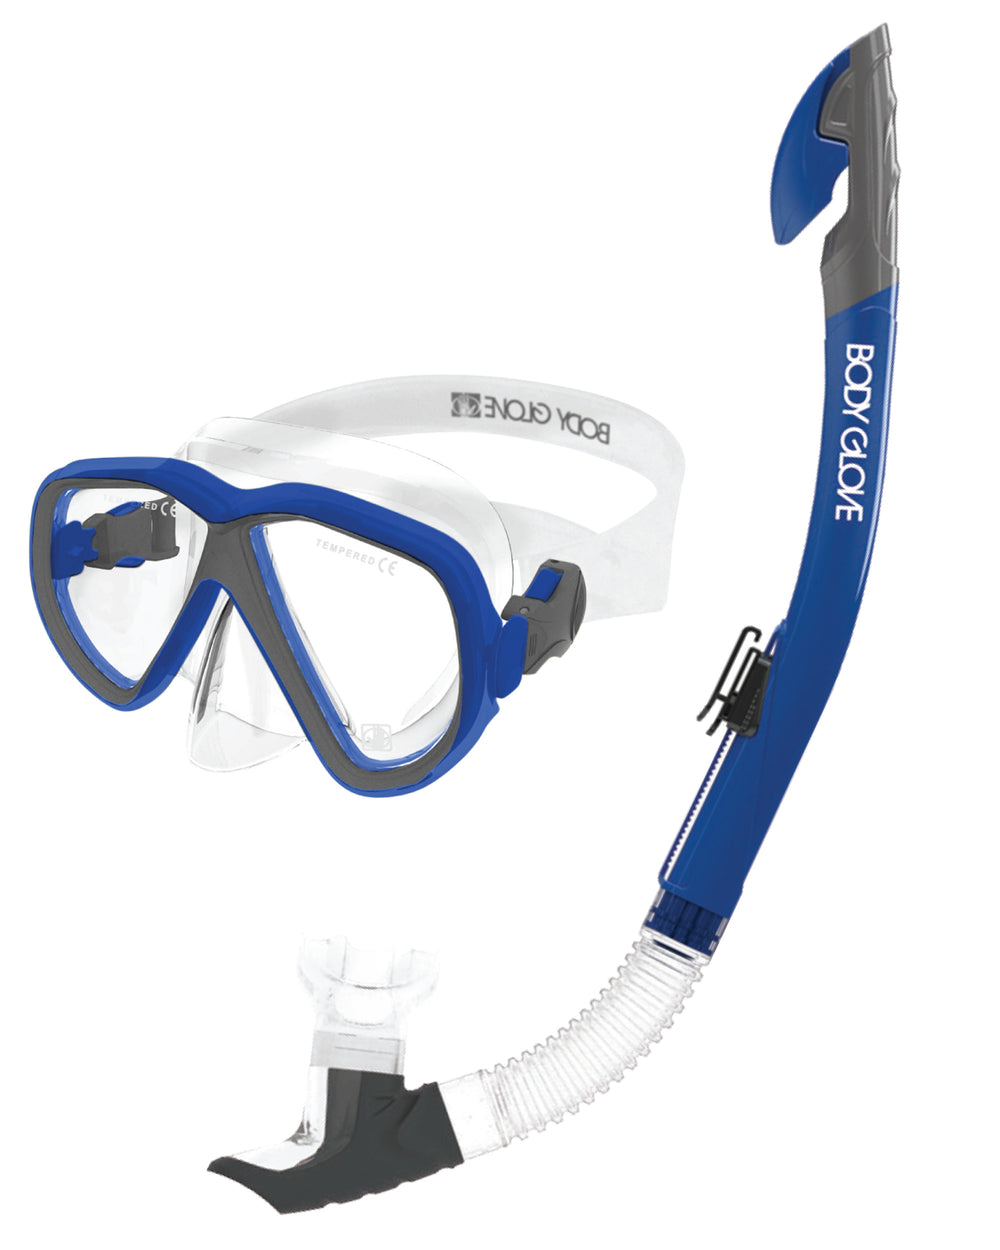 Azores Mask / Snorkel Combo - Blue/Grey